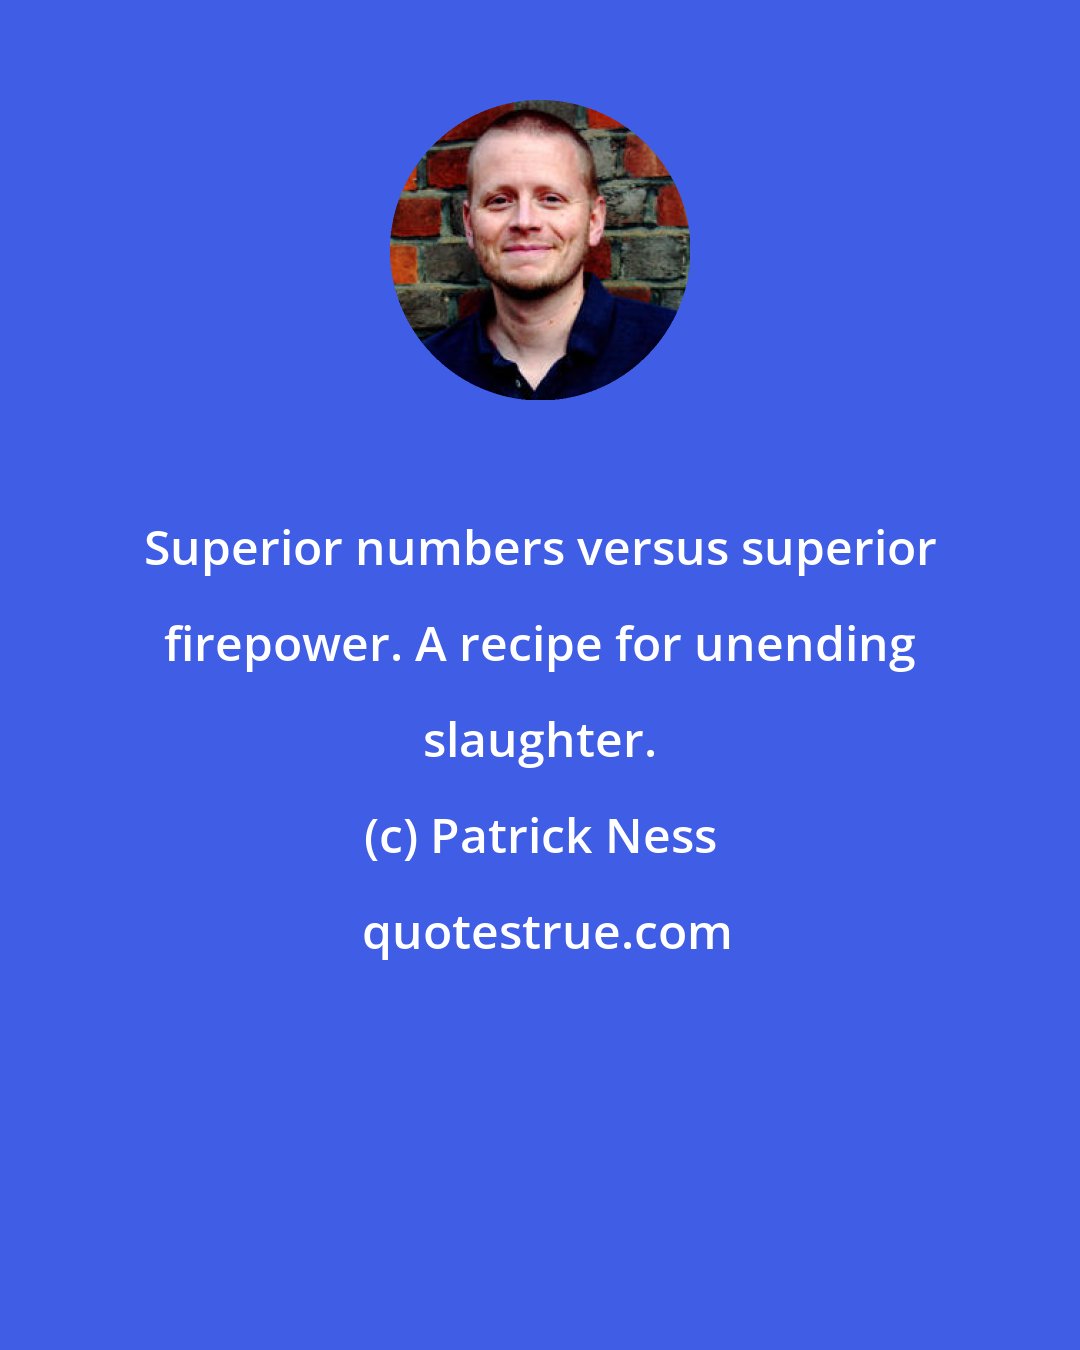 Patrick Ness: Superior numbers versus superior firepower. A recipe for unending slaughter.